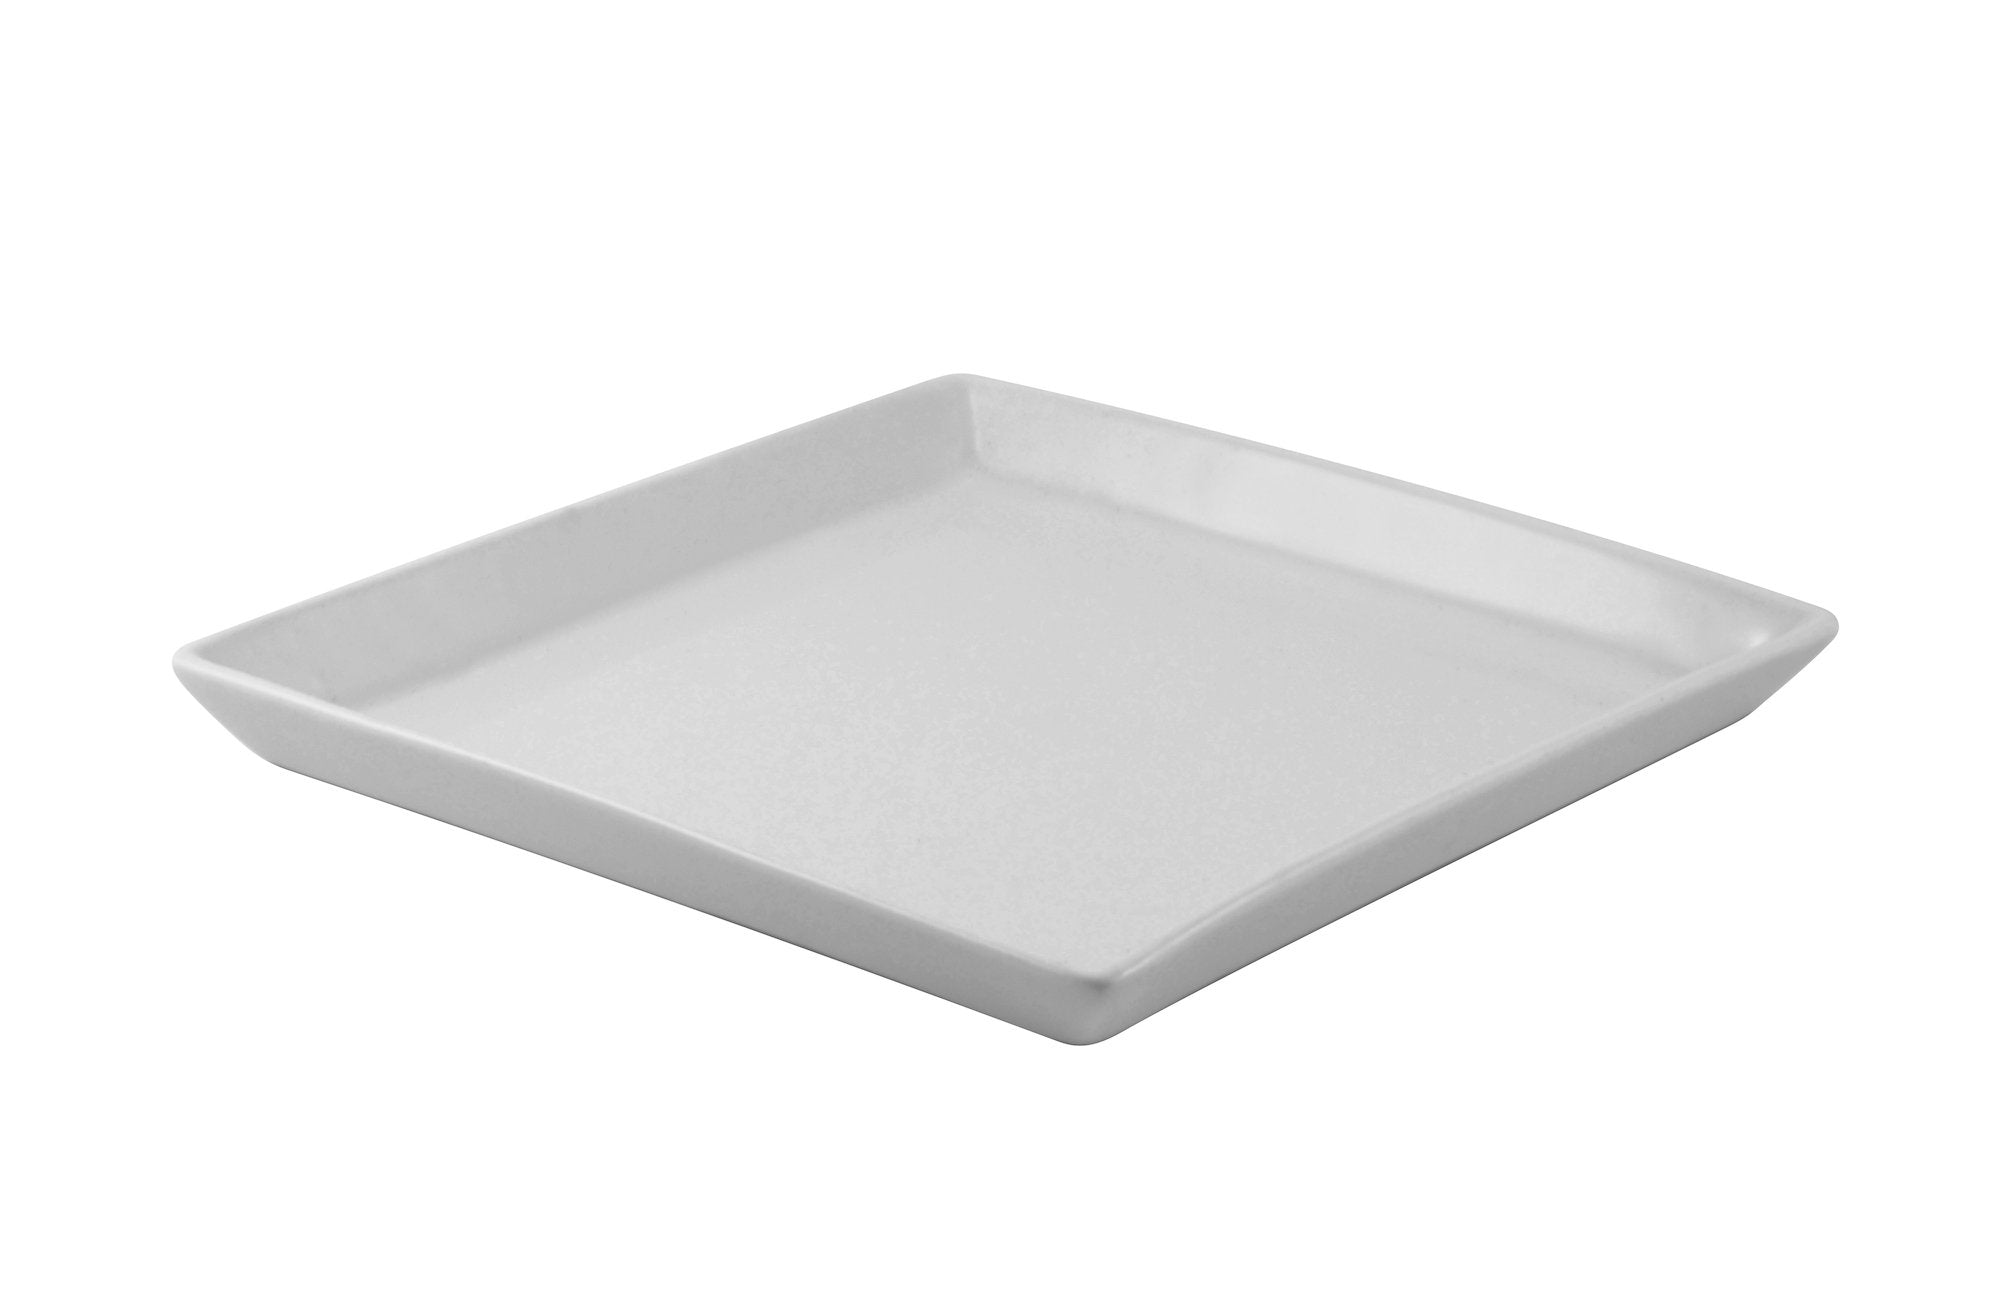 Whittier Collection, Square Plate  (24/Case) - iFoodservice Online